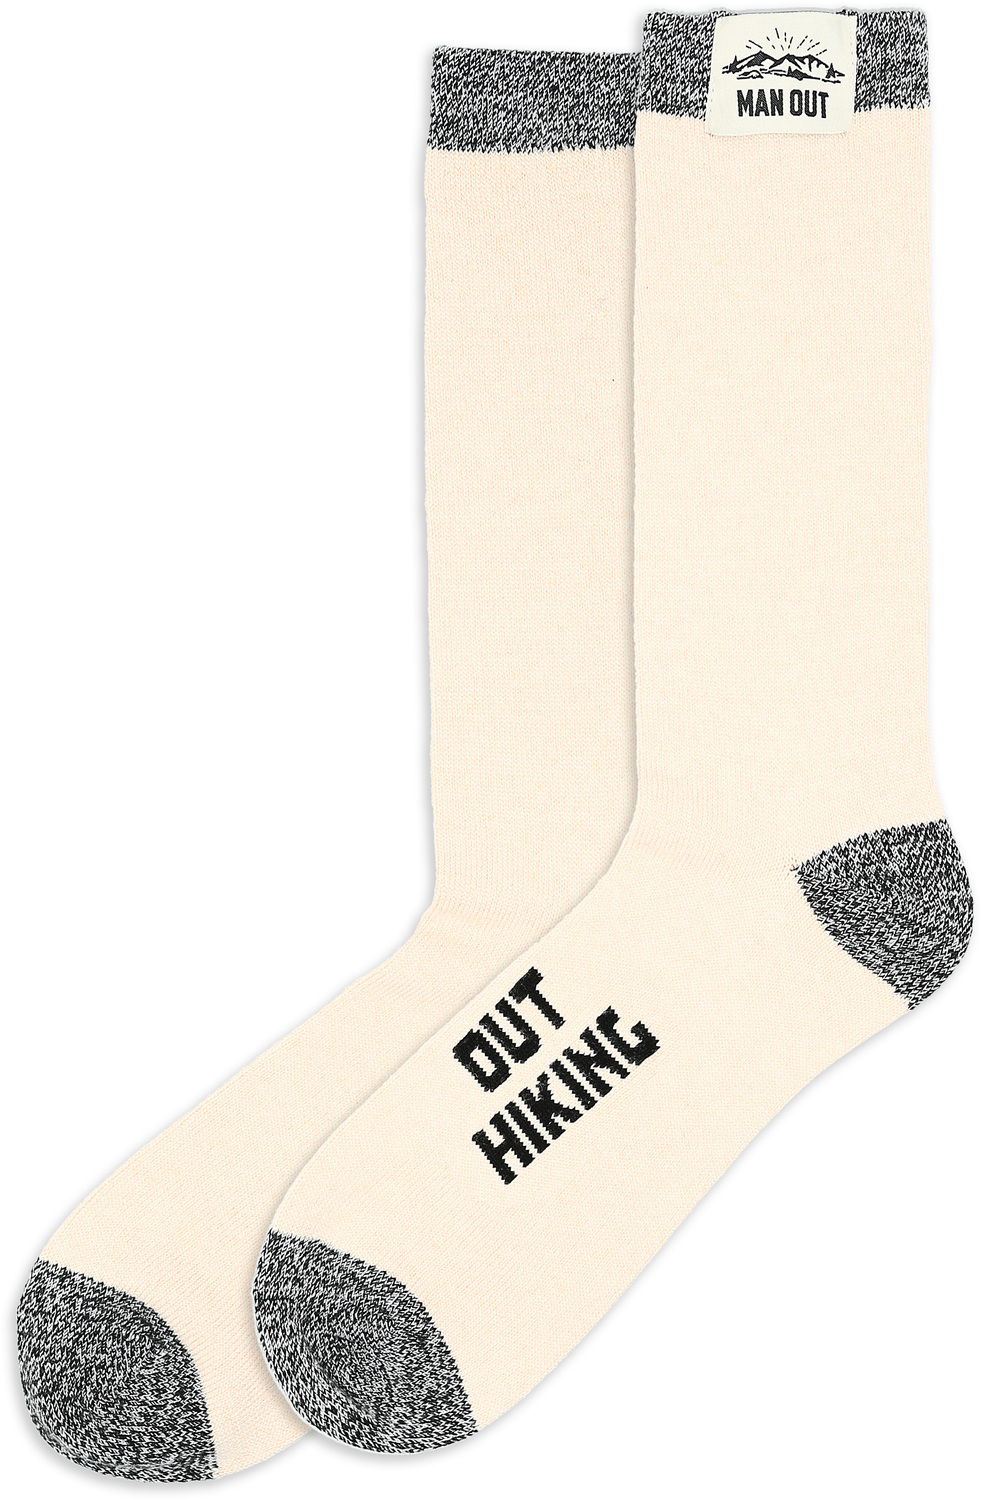 Out Hiking by Man Out - Out Hiking - Men's Socks